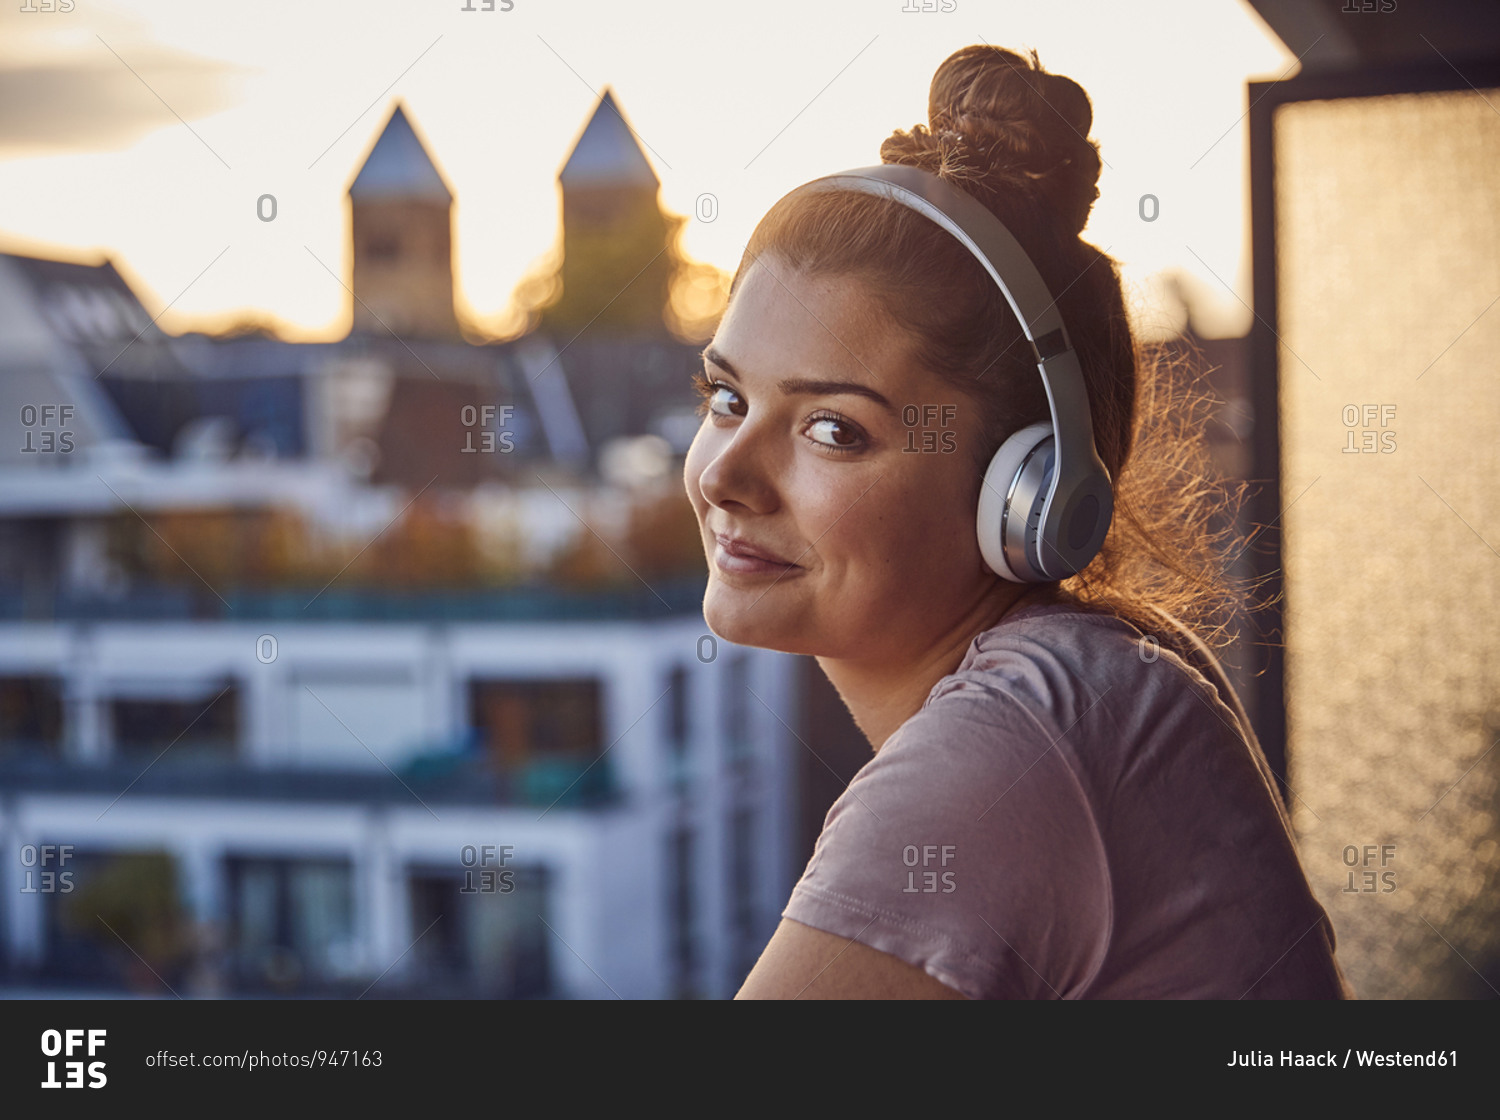 Portrait of smiling young woman with bun listening music with headphones on balcony in the evening